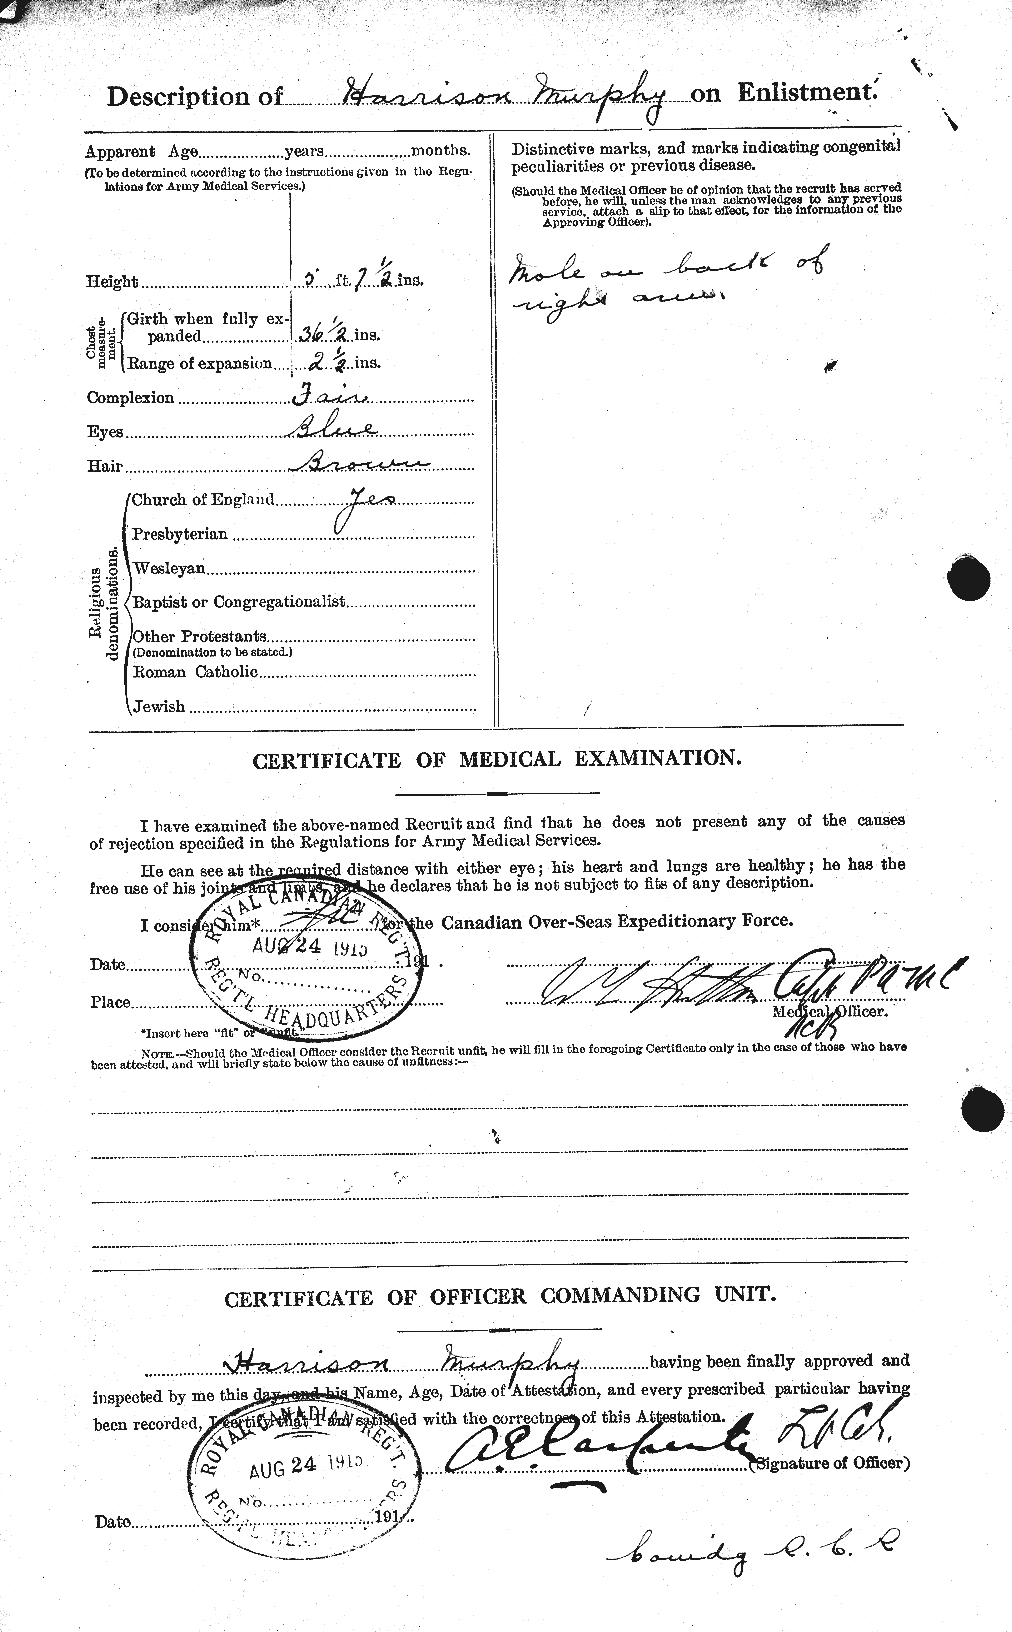 Personnel Records of the First World War - CEF 514529b